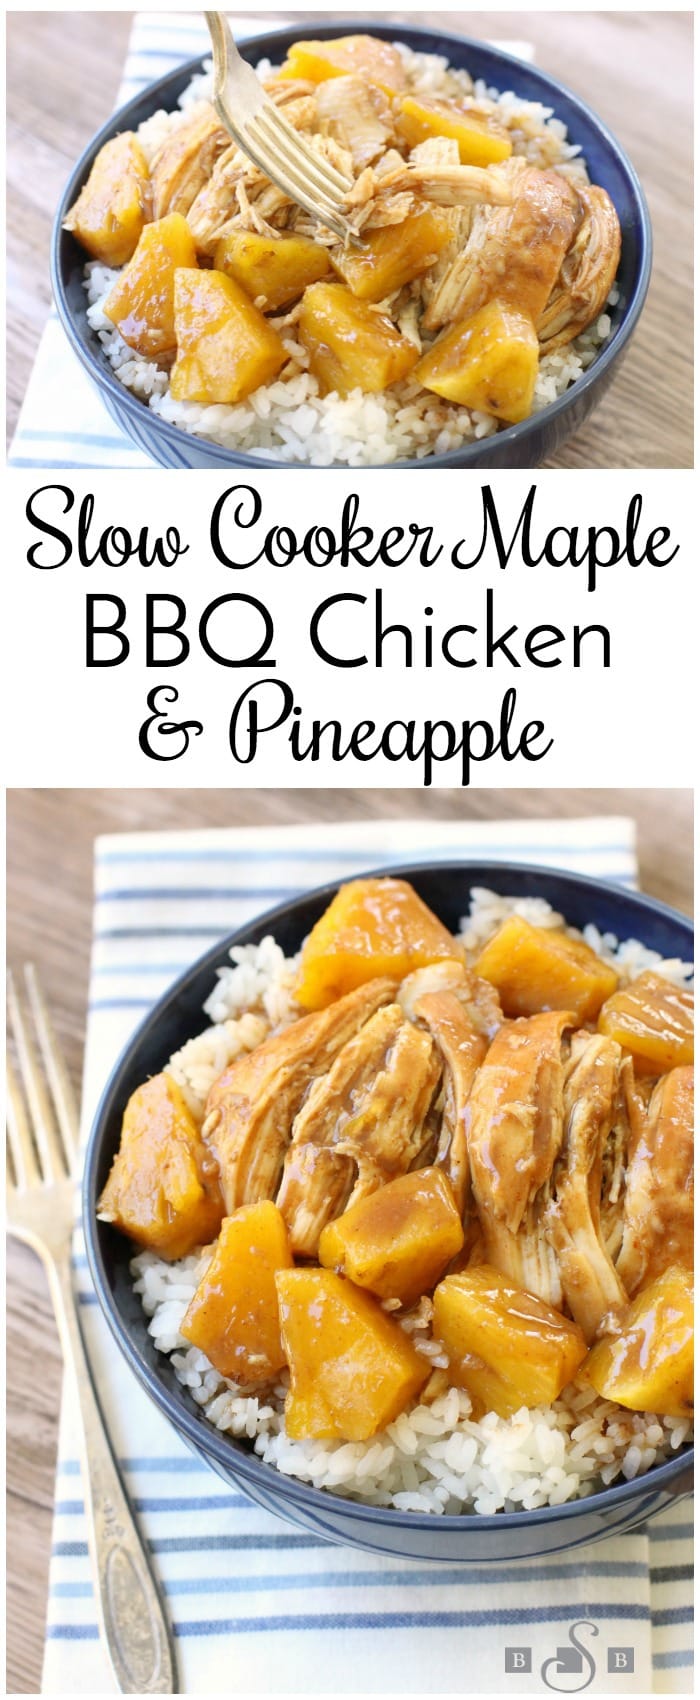 Slow Cooker BBQ Chicken is sweet, tangy and super easy to make. Add in pineapple and serve over rice for a complete chicken dinner.
